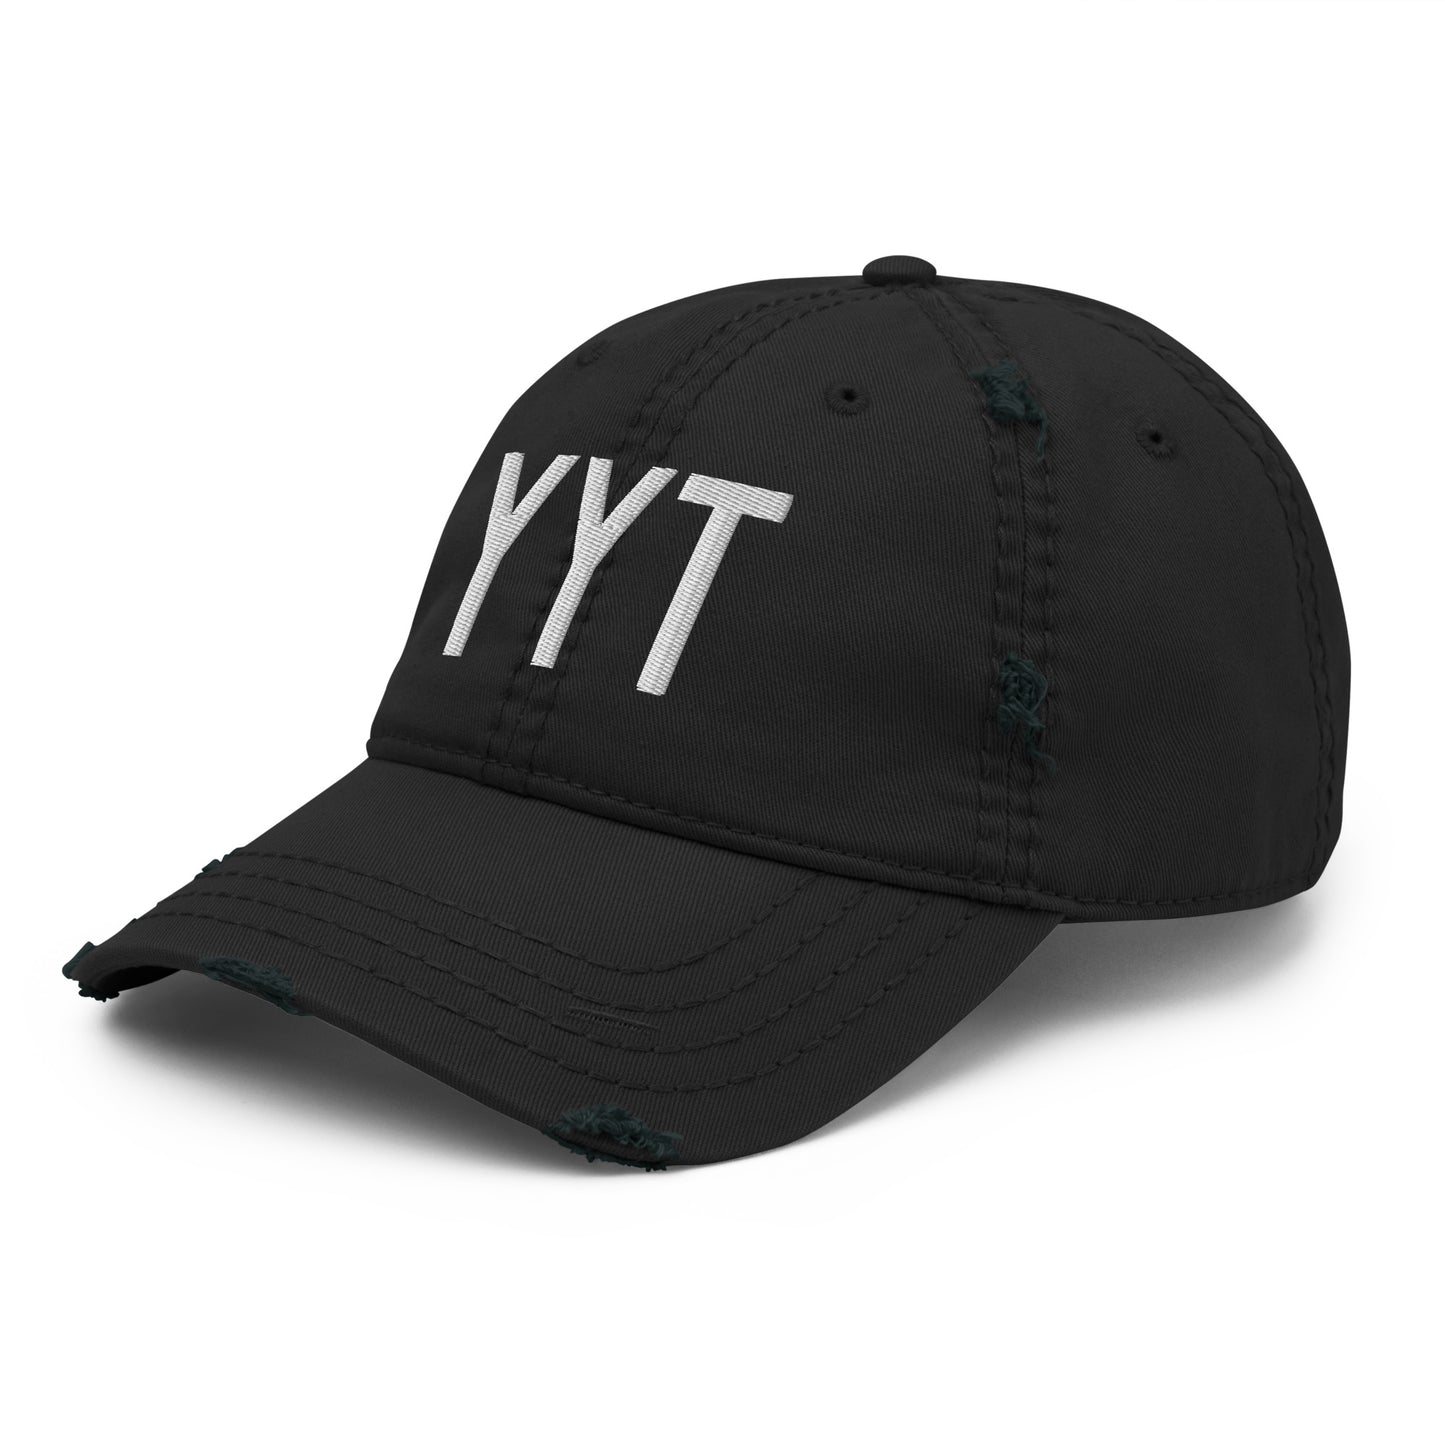 Airport Code Distressed Hat - White • YYT St. John's • YHM Designs - Image 11